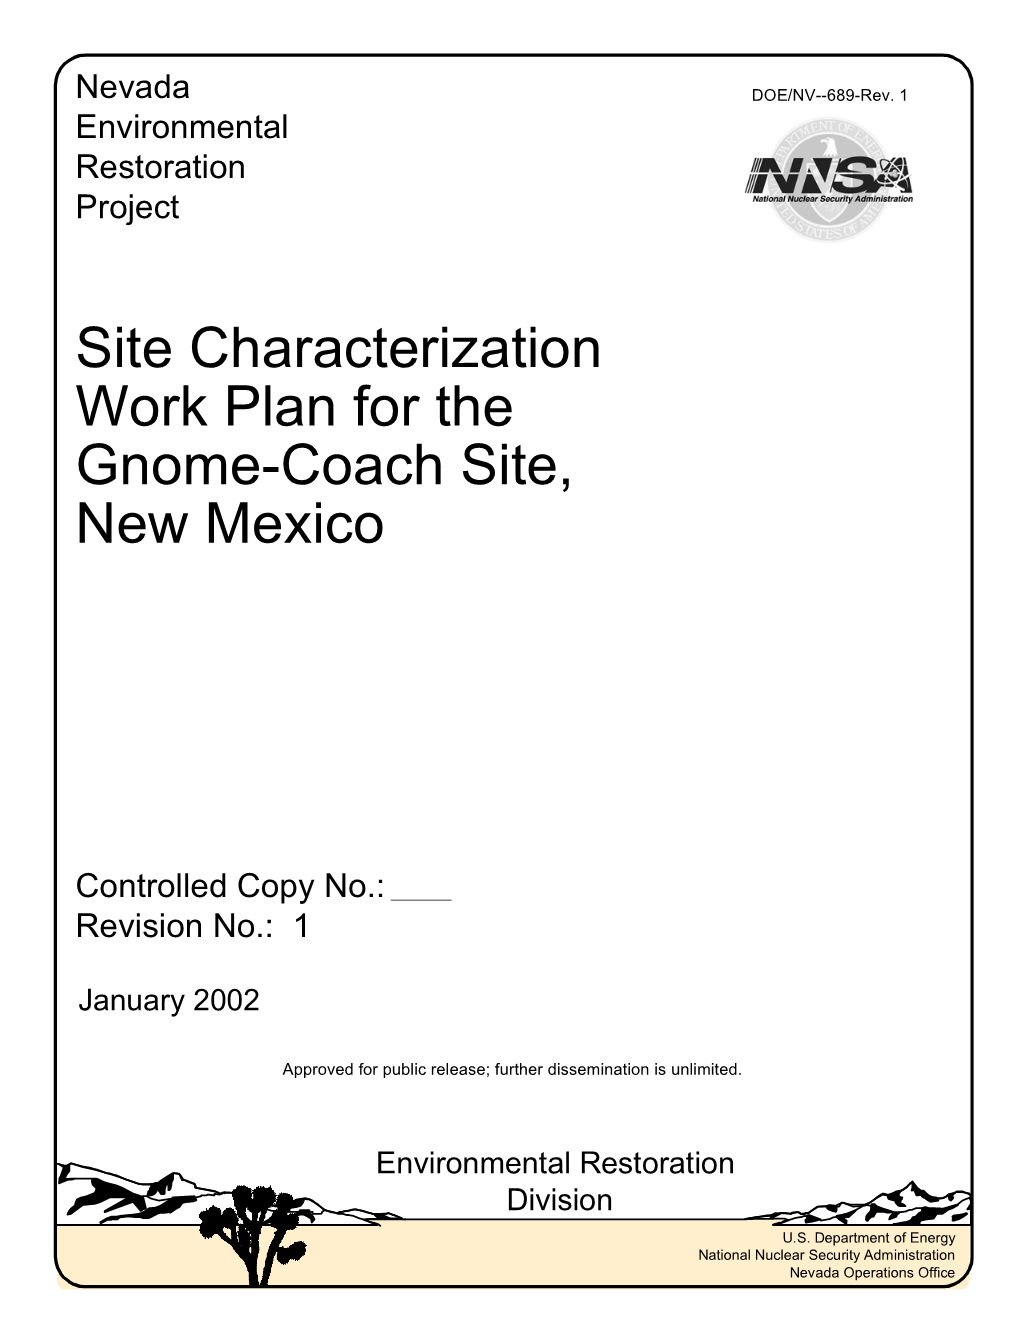 Site Characterization Work Plan for the Gnome-Coach Site, New Mexico